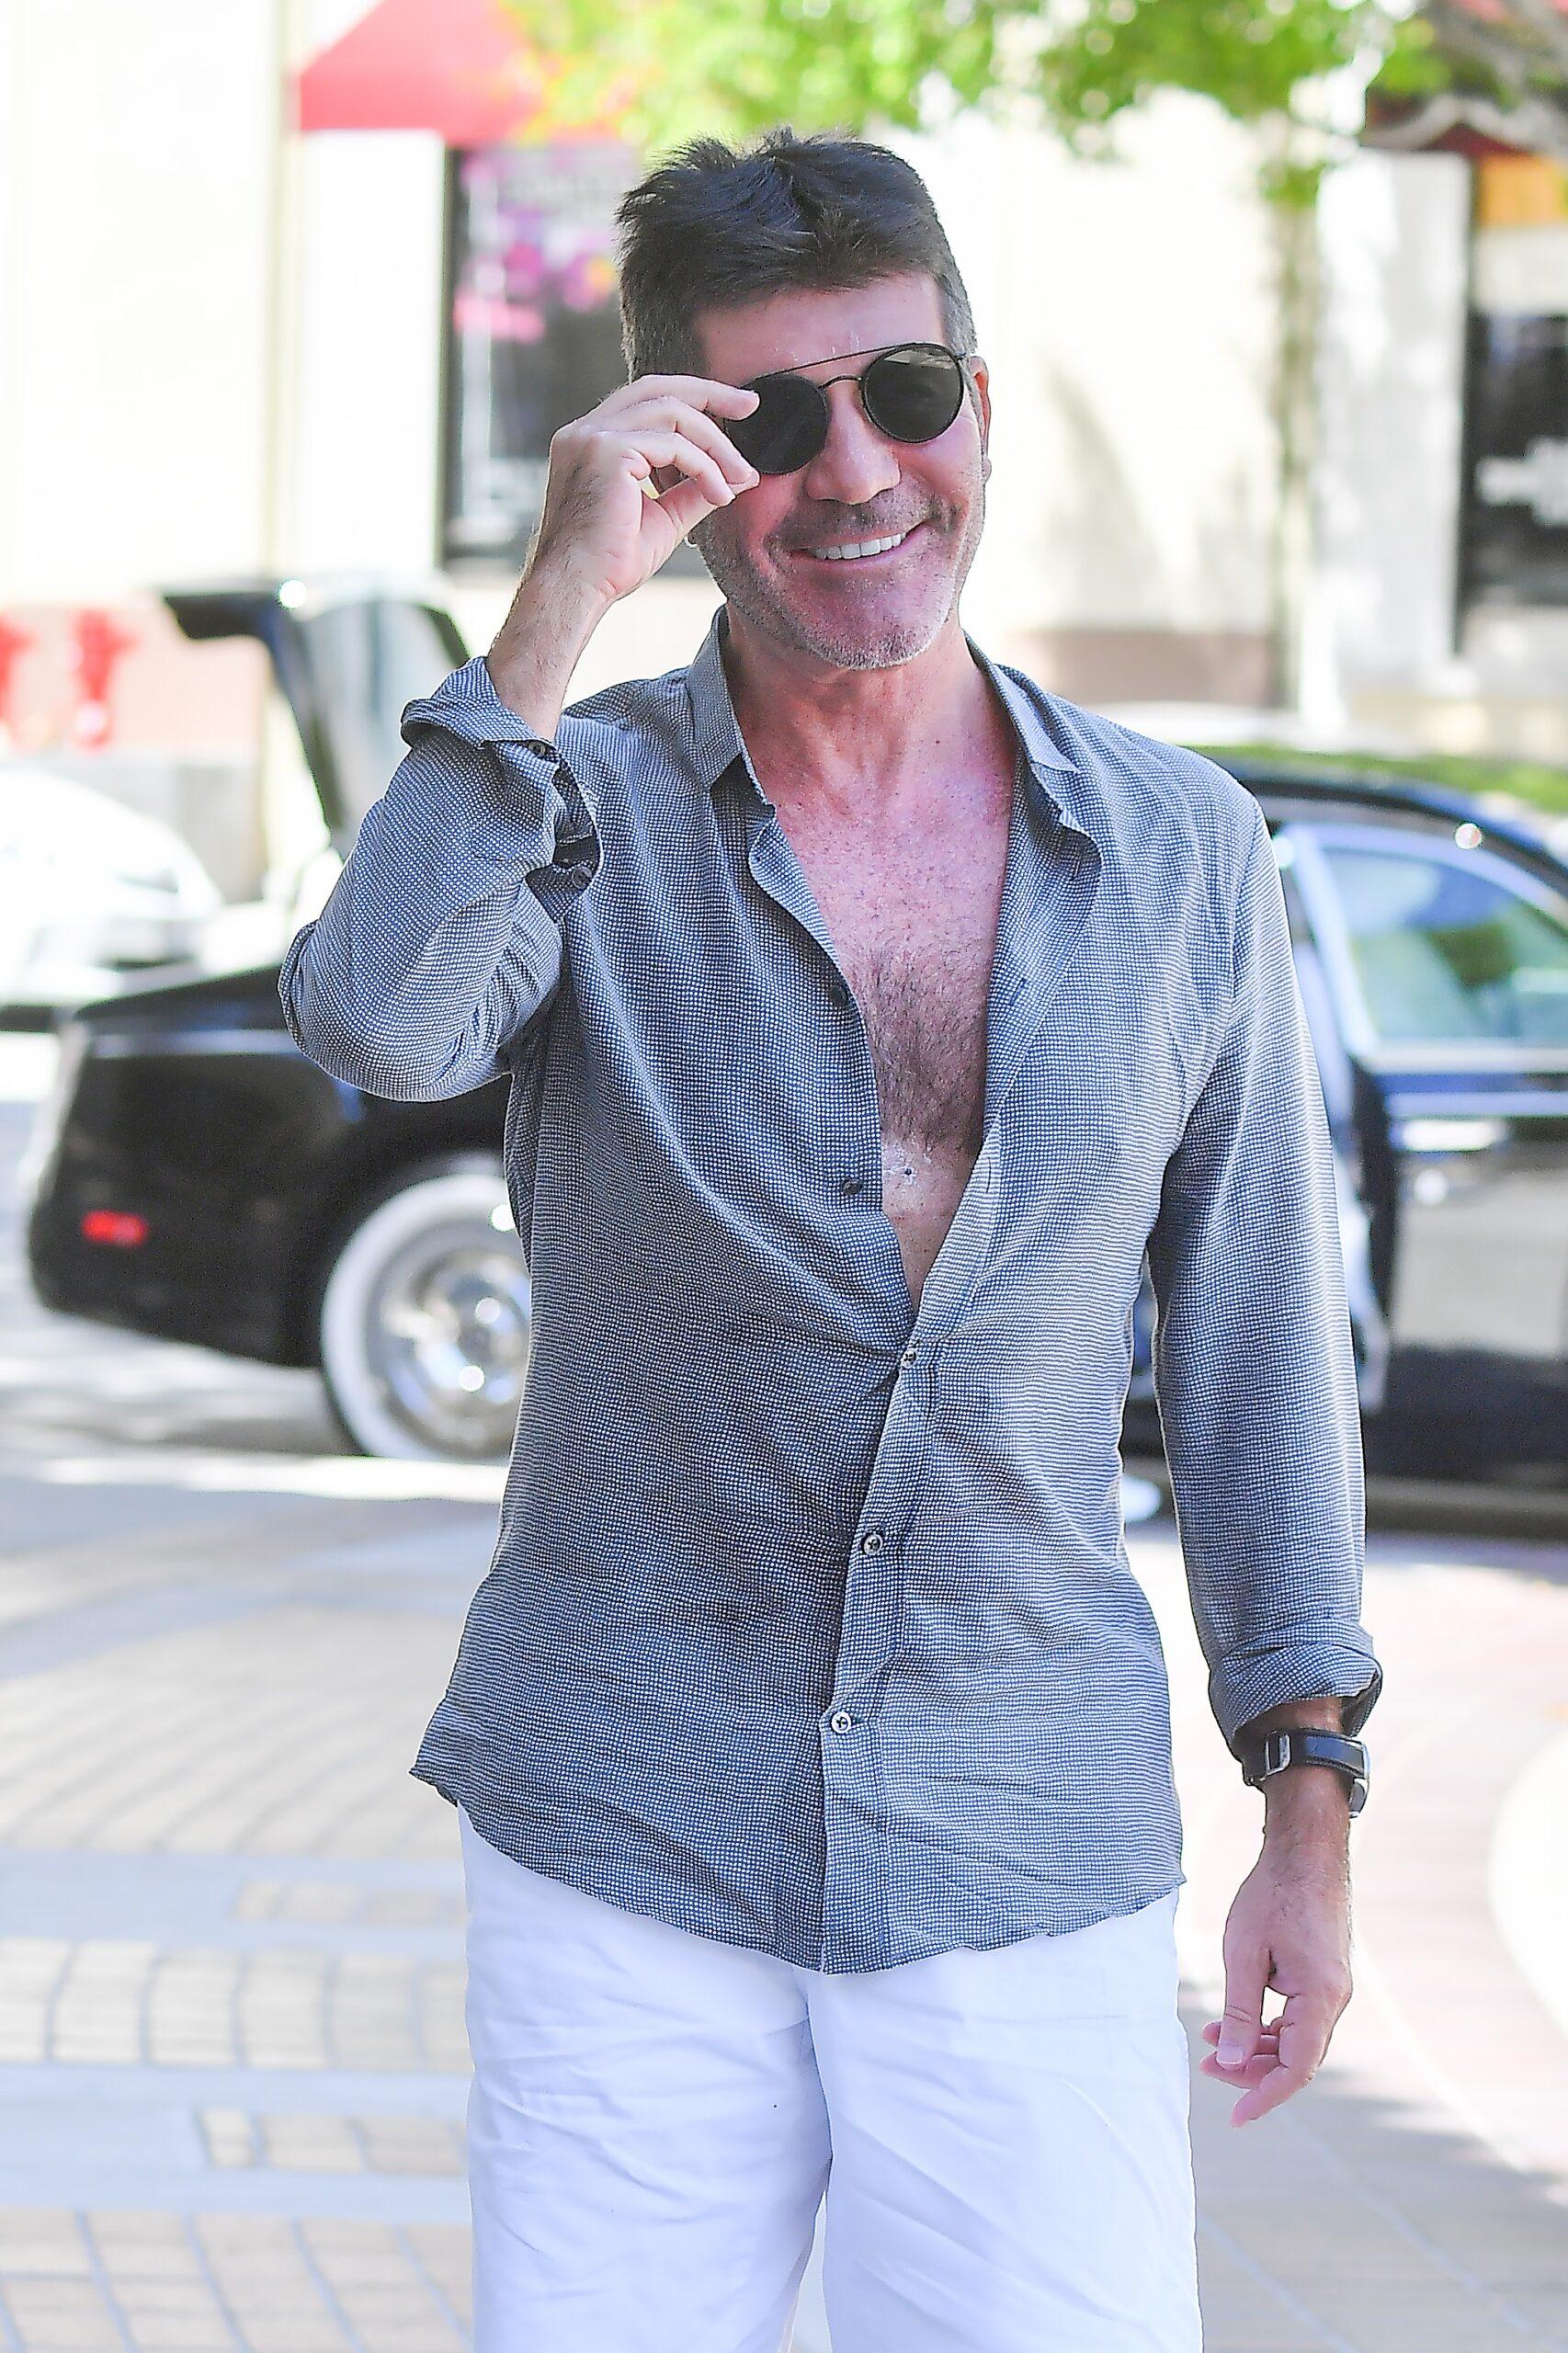 Simon Cowell arrives to AGT with an unbuttoned shirt